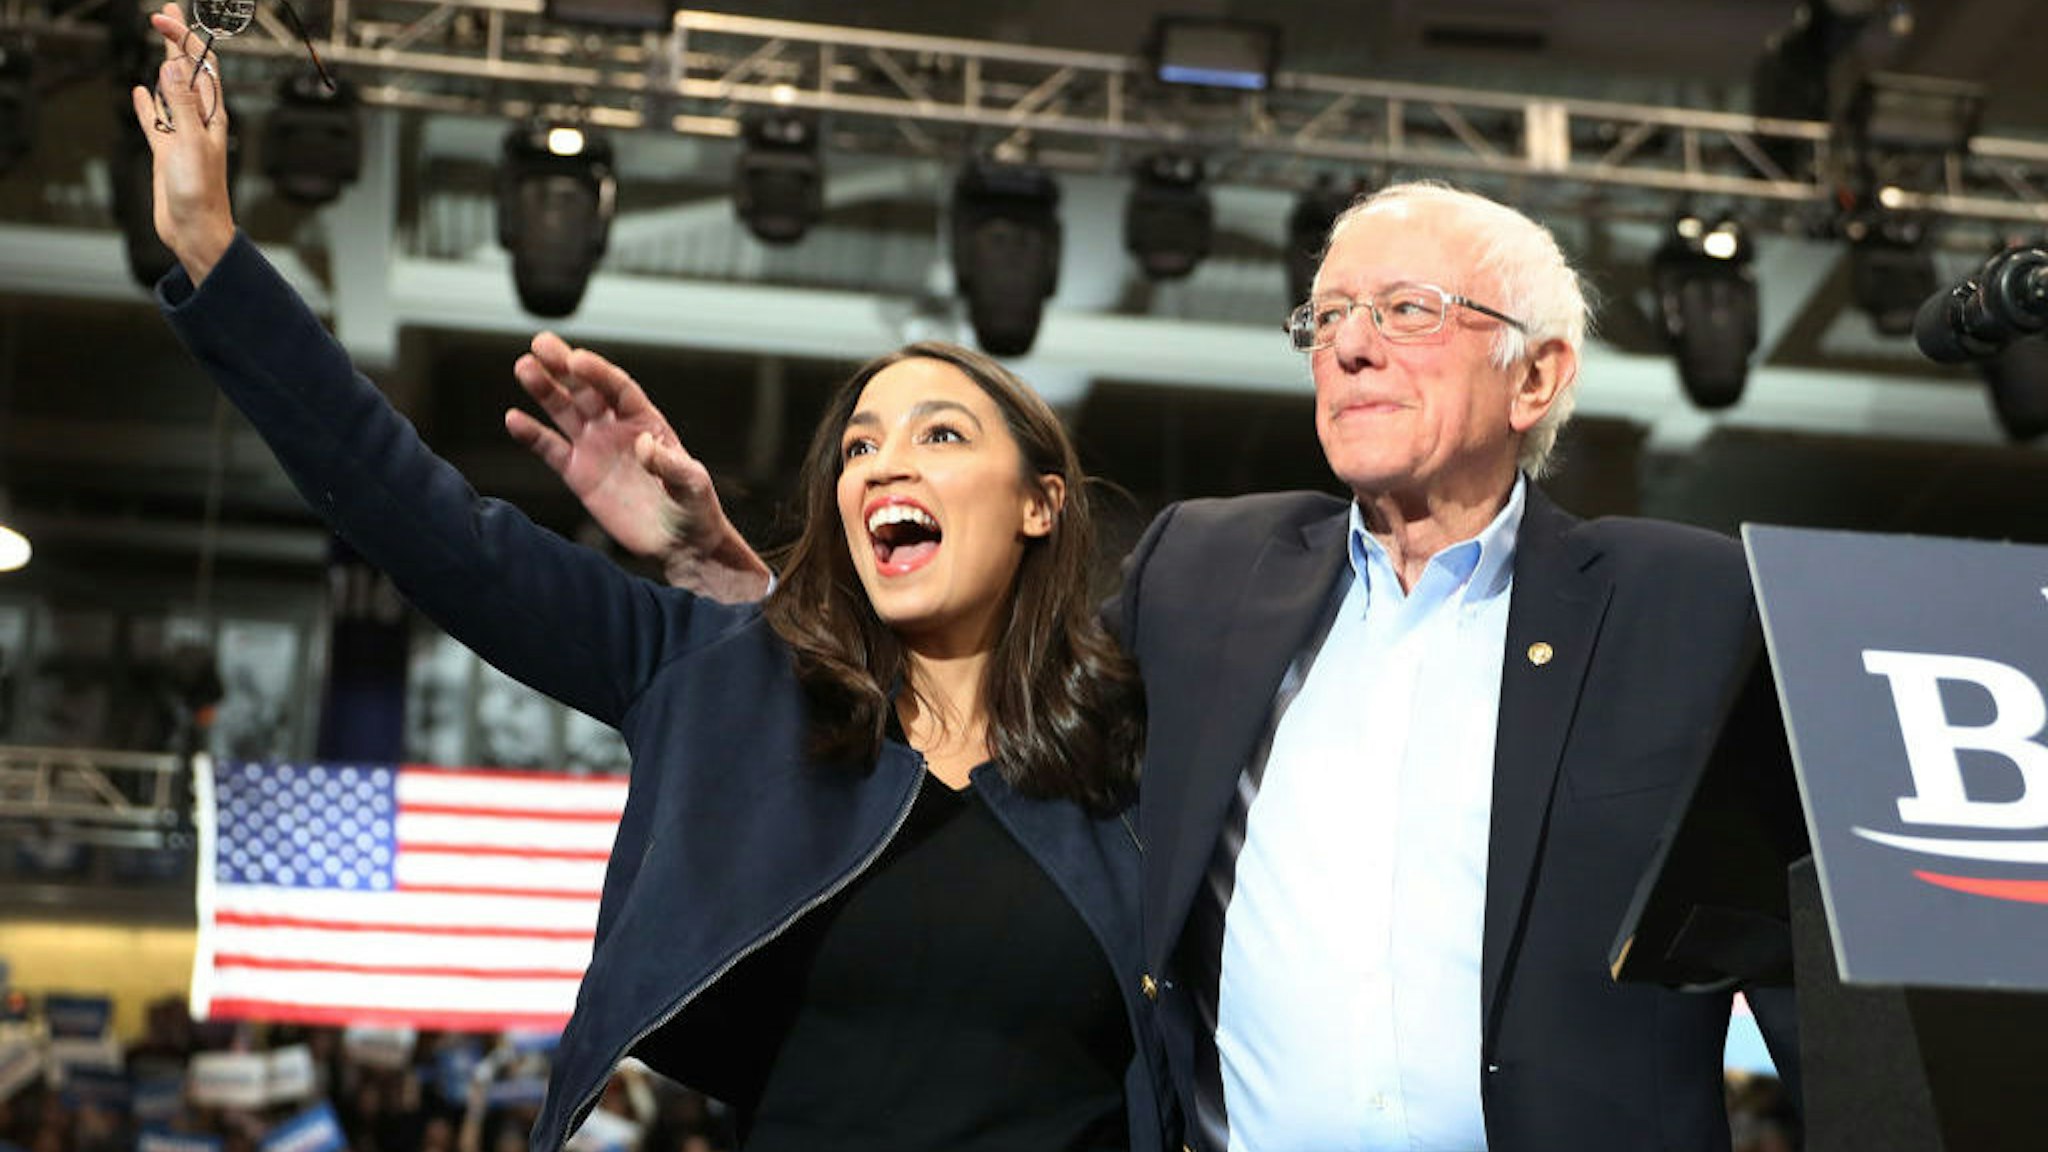 DURHAM, NEW HAMPSHIRE - FEBRUARY 10: U.S. Rep. Alexandria Ocasio-Cortez (D-N.Y) and Democratic presidential candidate Sen. Bernie Sanders (I-VT) stand together during his campaign event at the Whittemore Center Arena on February 10, 2020 in Durham, New Hampshire. The state's Democratic primary is tomorrow. (Photo by Joe Raedle/Getty Images)